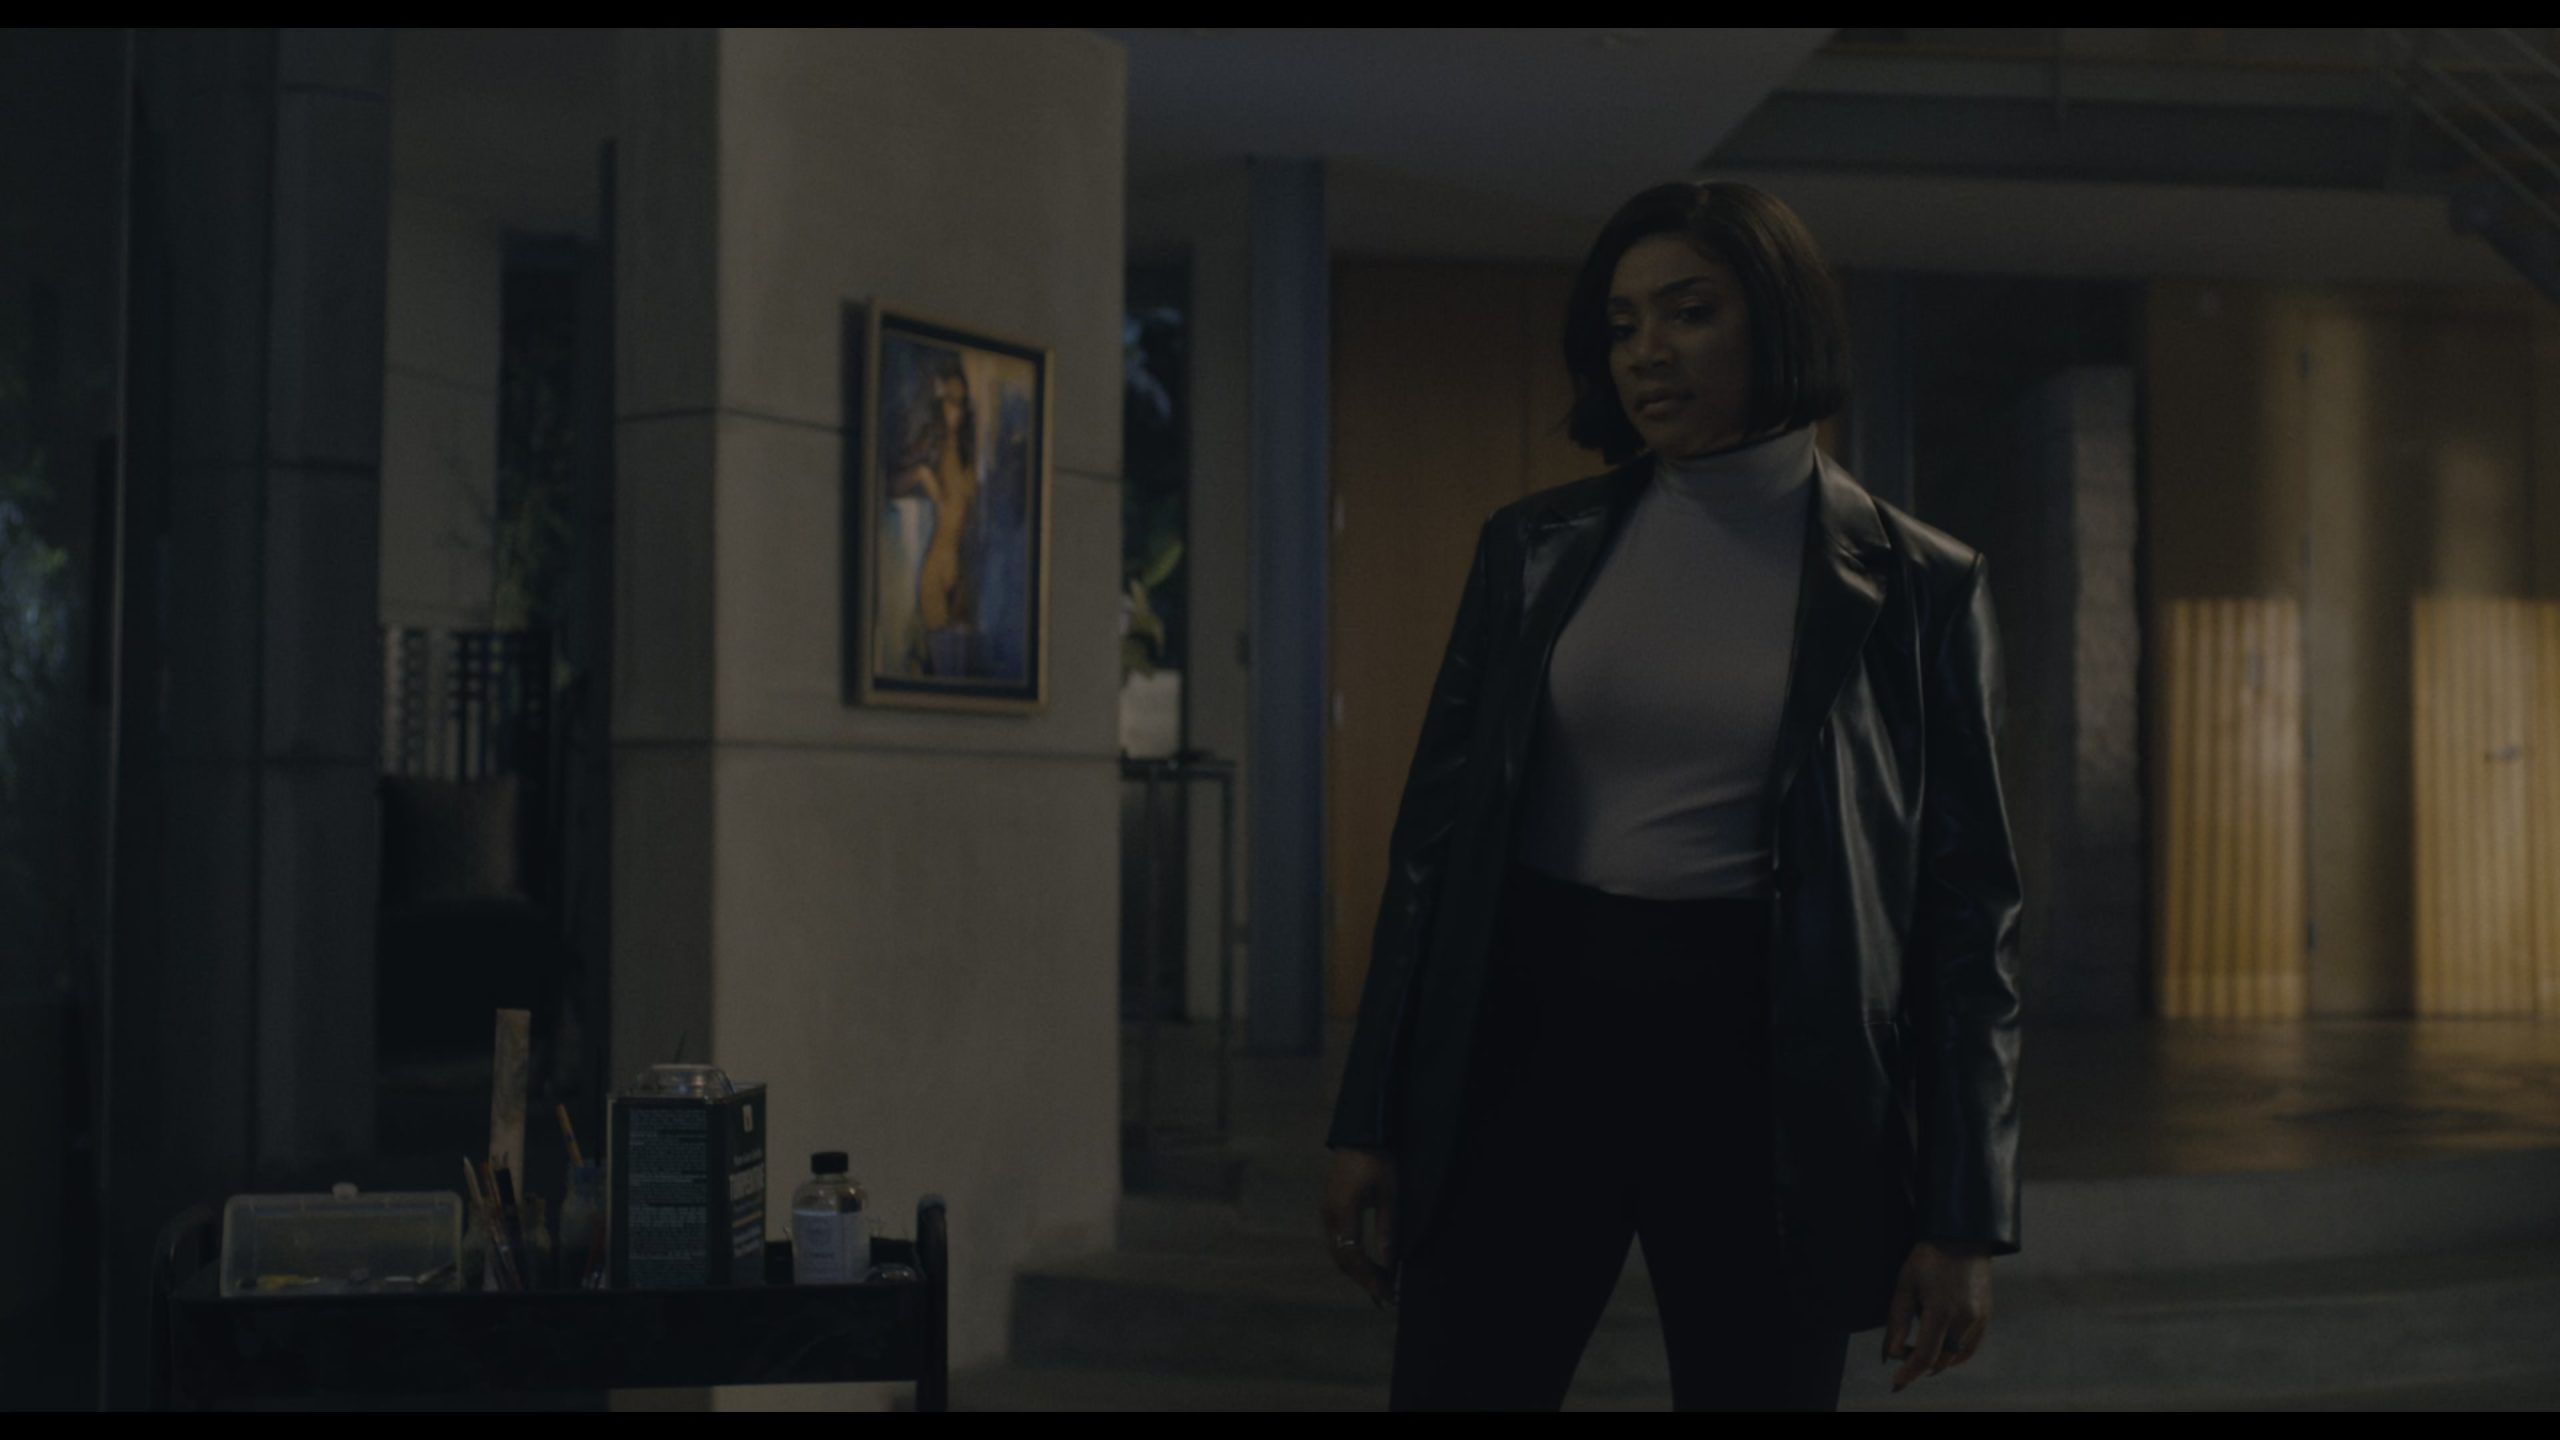 Worn on The Afterparty TV Show - Black Leather Jacket of Tiffany Haddish as Detective Danner